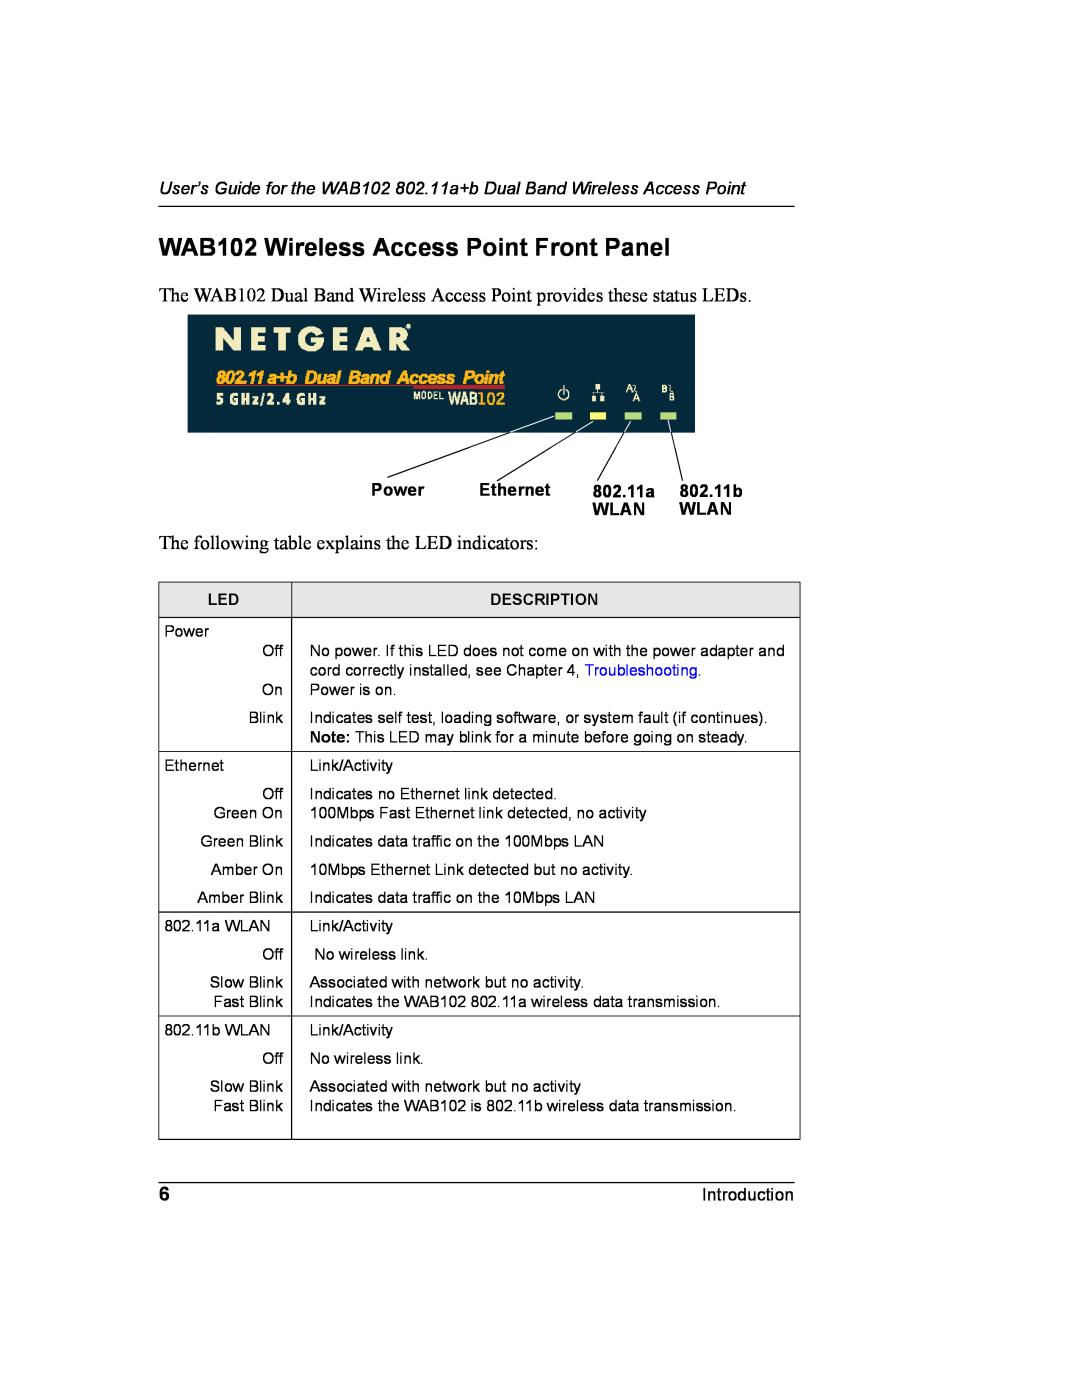 NETGEAR WAB102 Wireless Access Point Front Panel, User’s Guide for the WAB102 802.11a+b Dual Band Wireless Access Point 